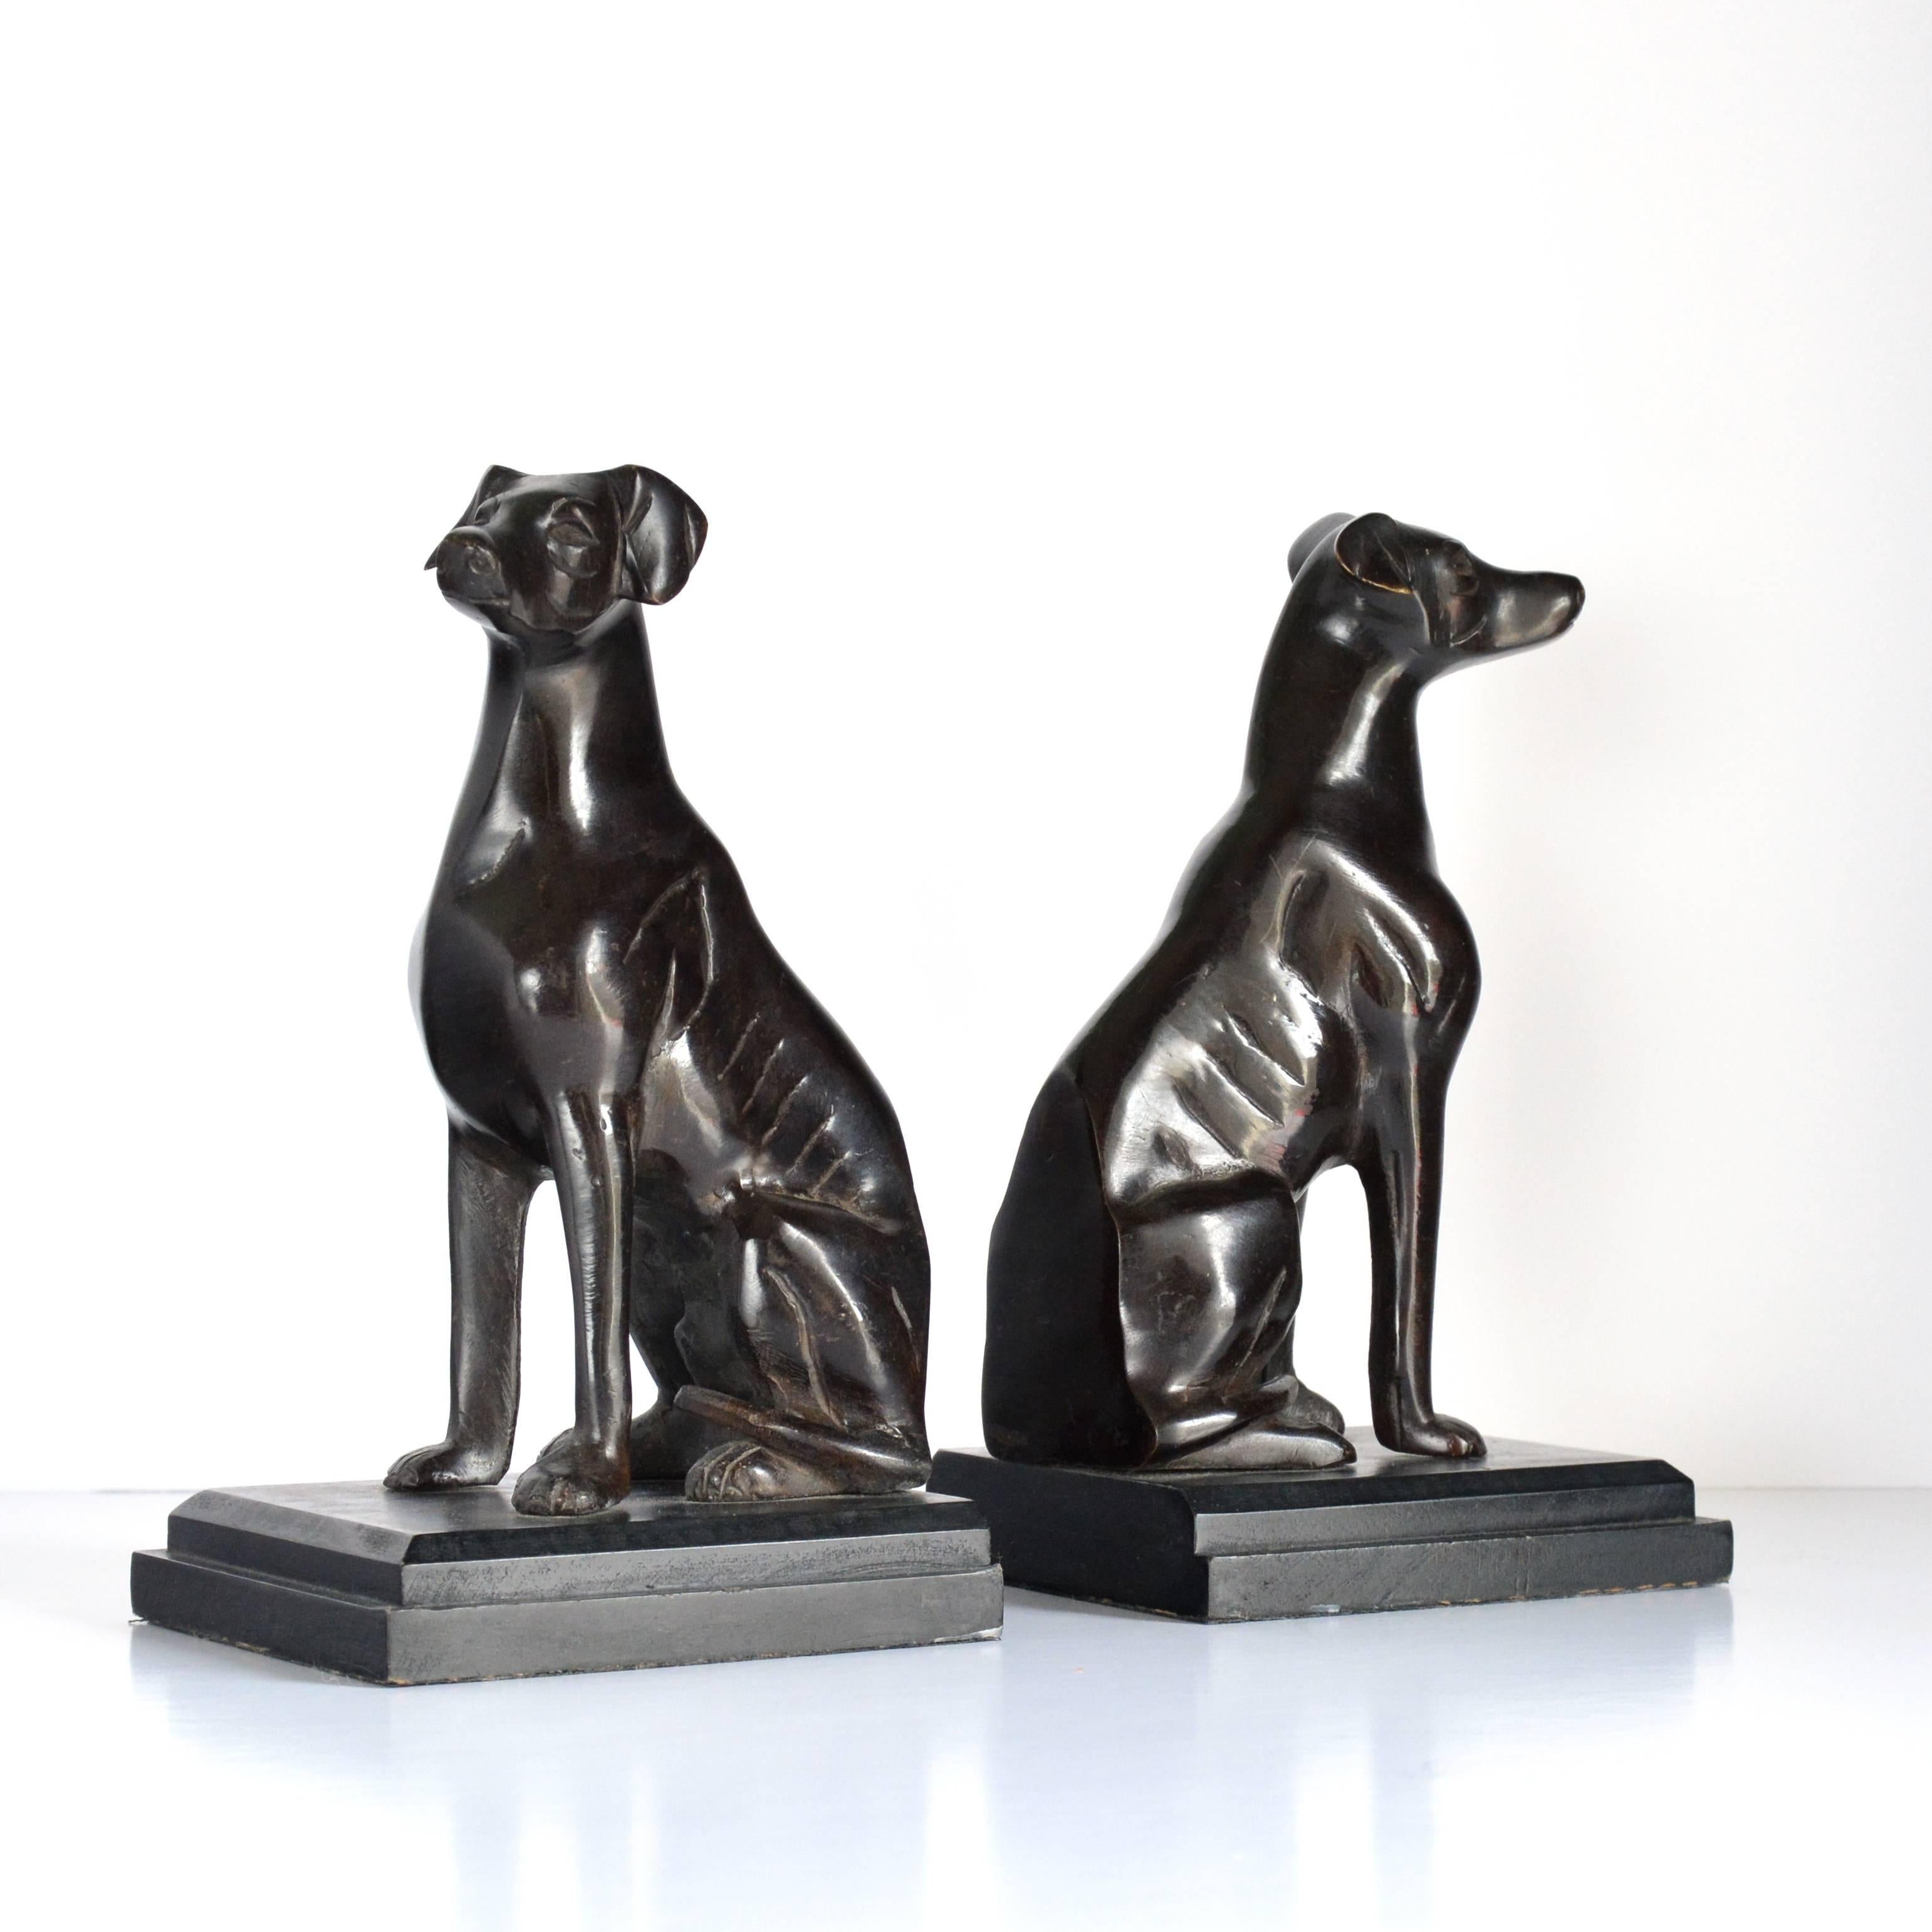 A pair of bronze bookends, modelled as dogs sitting on their haunches, 20th century.

Available to view at Brunswick House, London.

Each: 21cm high, 12cm wide, 11cm deep.